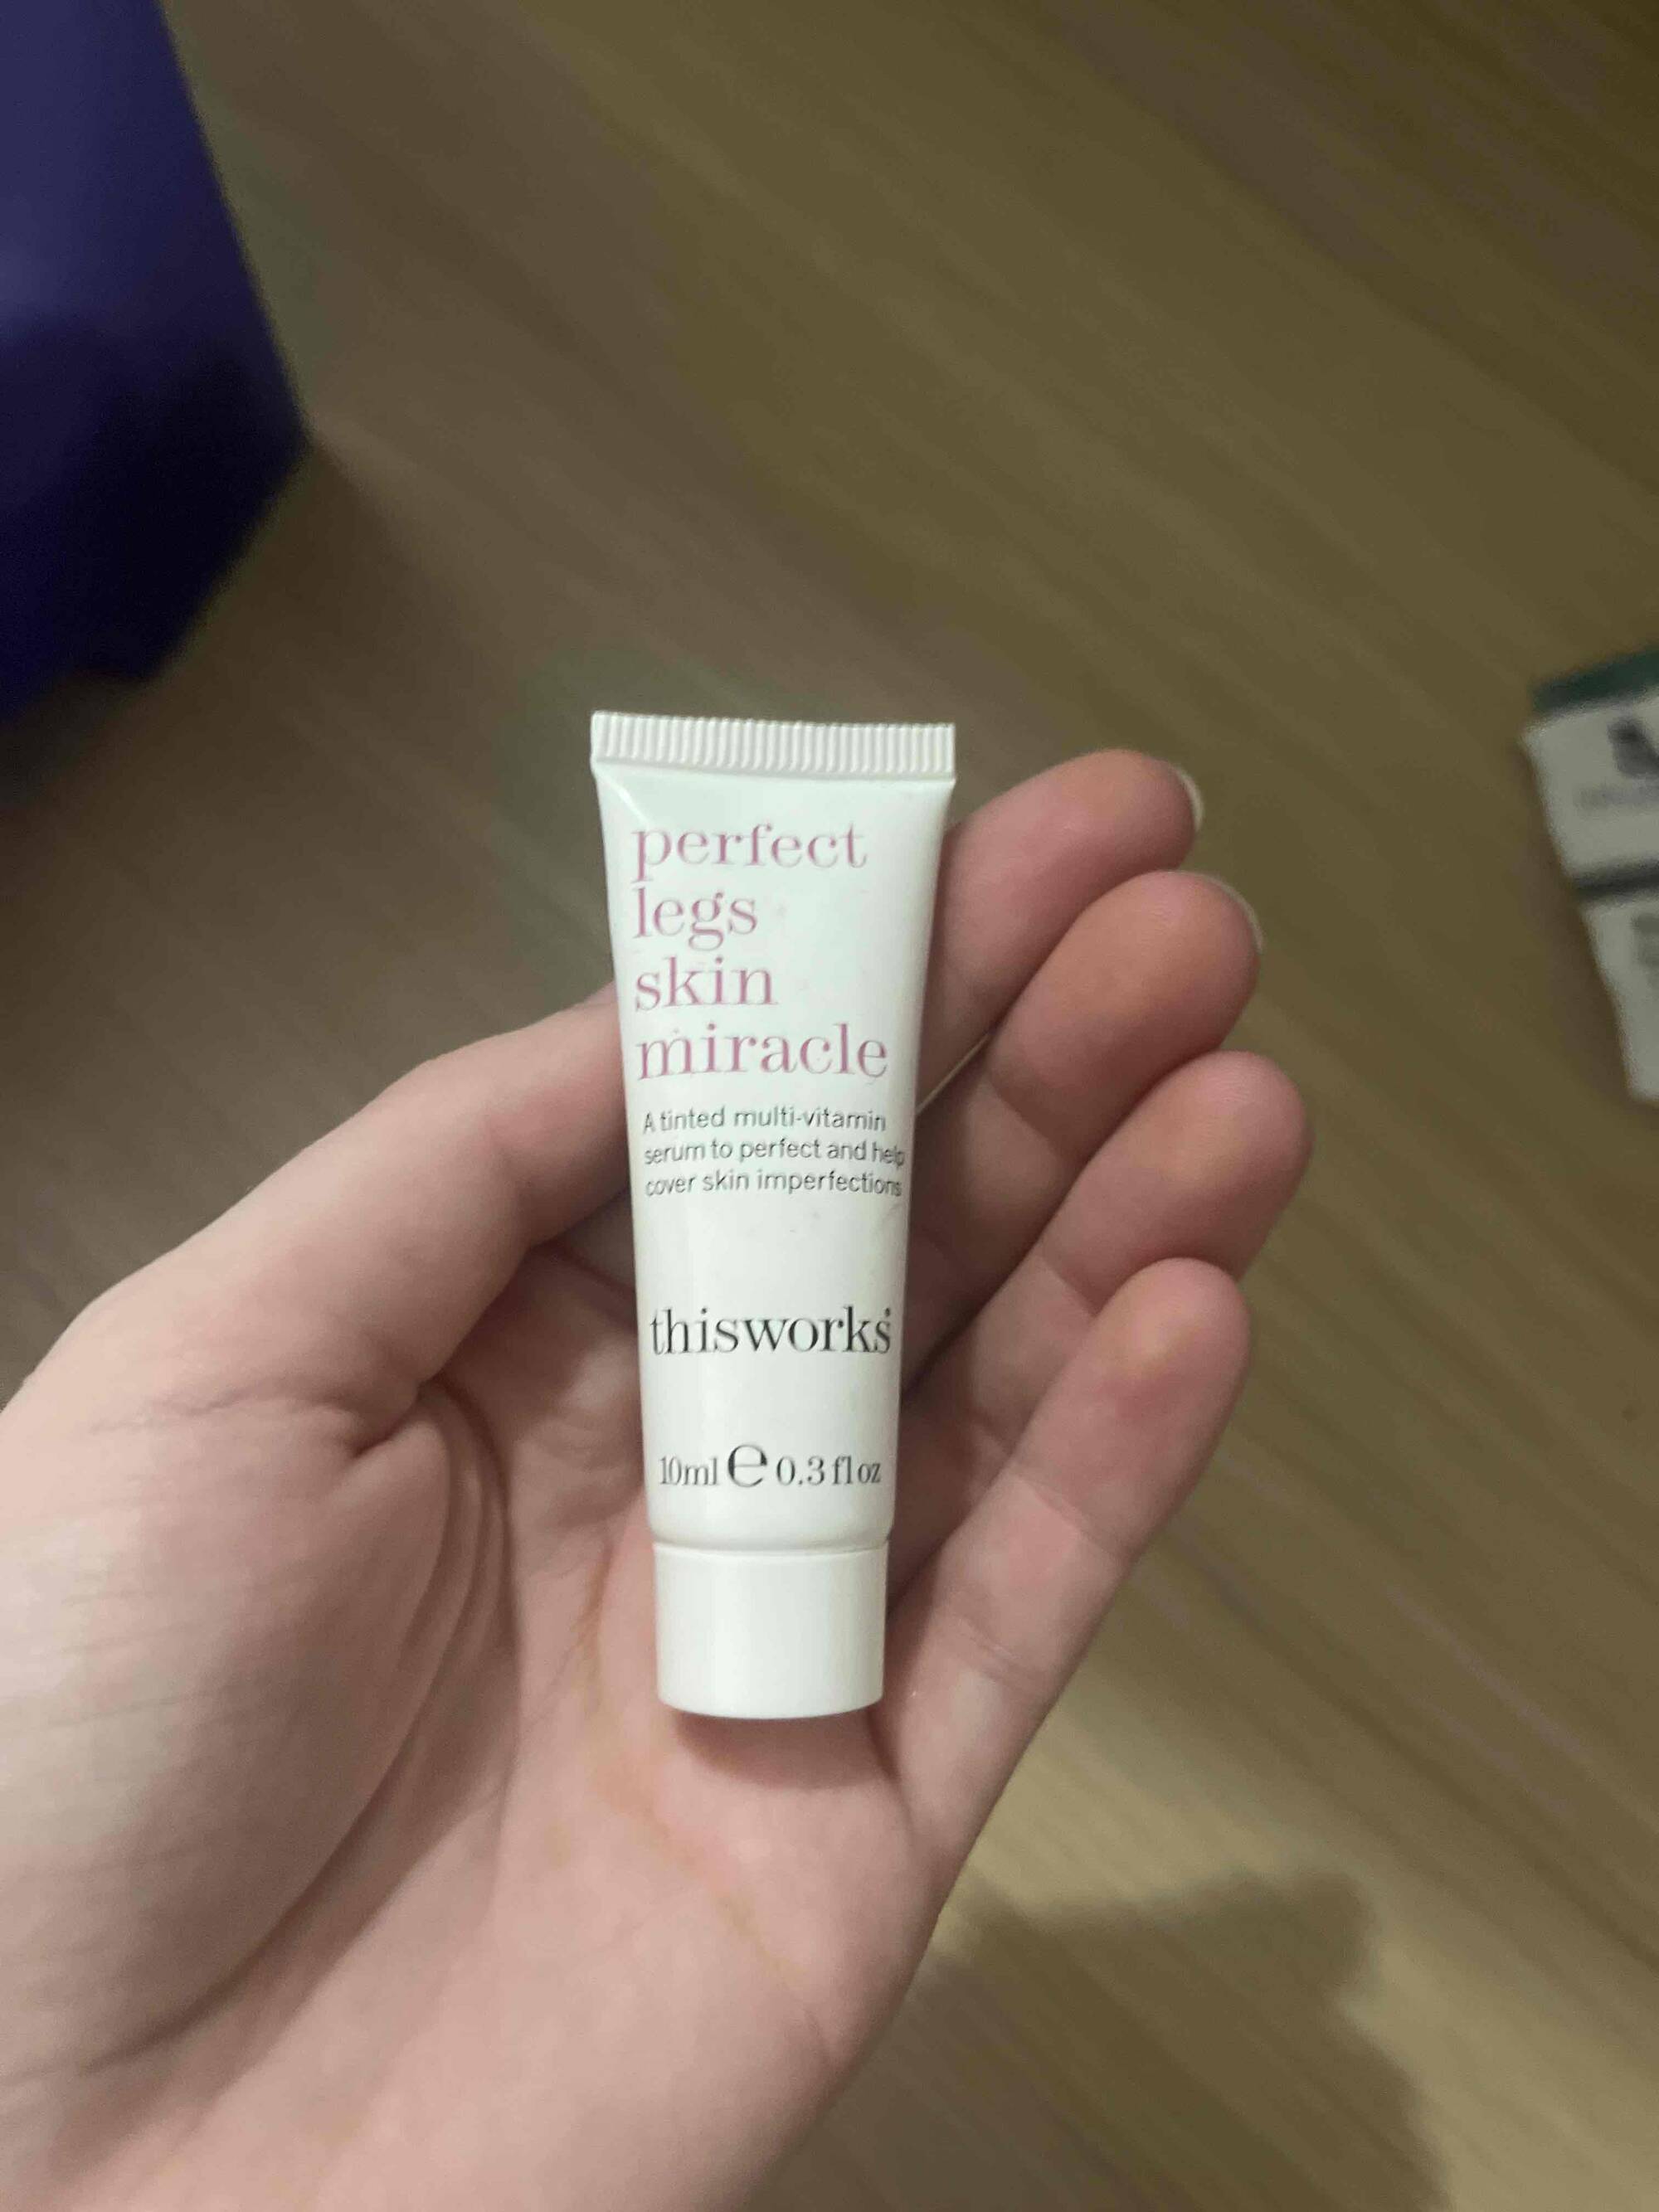 THISWORKS - Perfect legs skin miracle